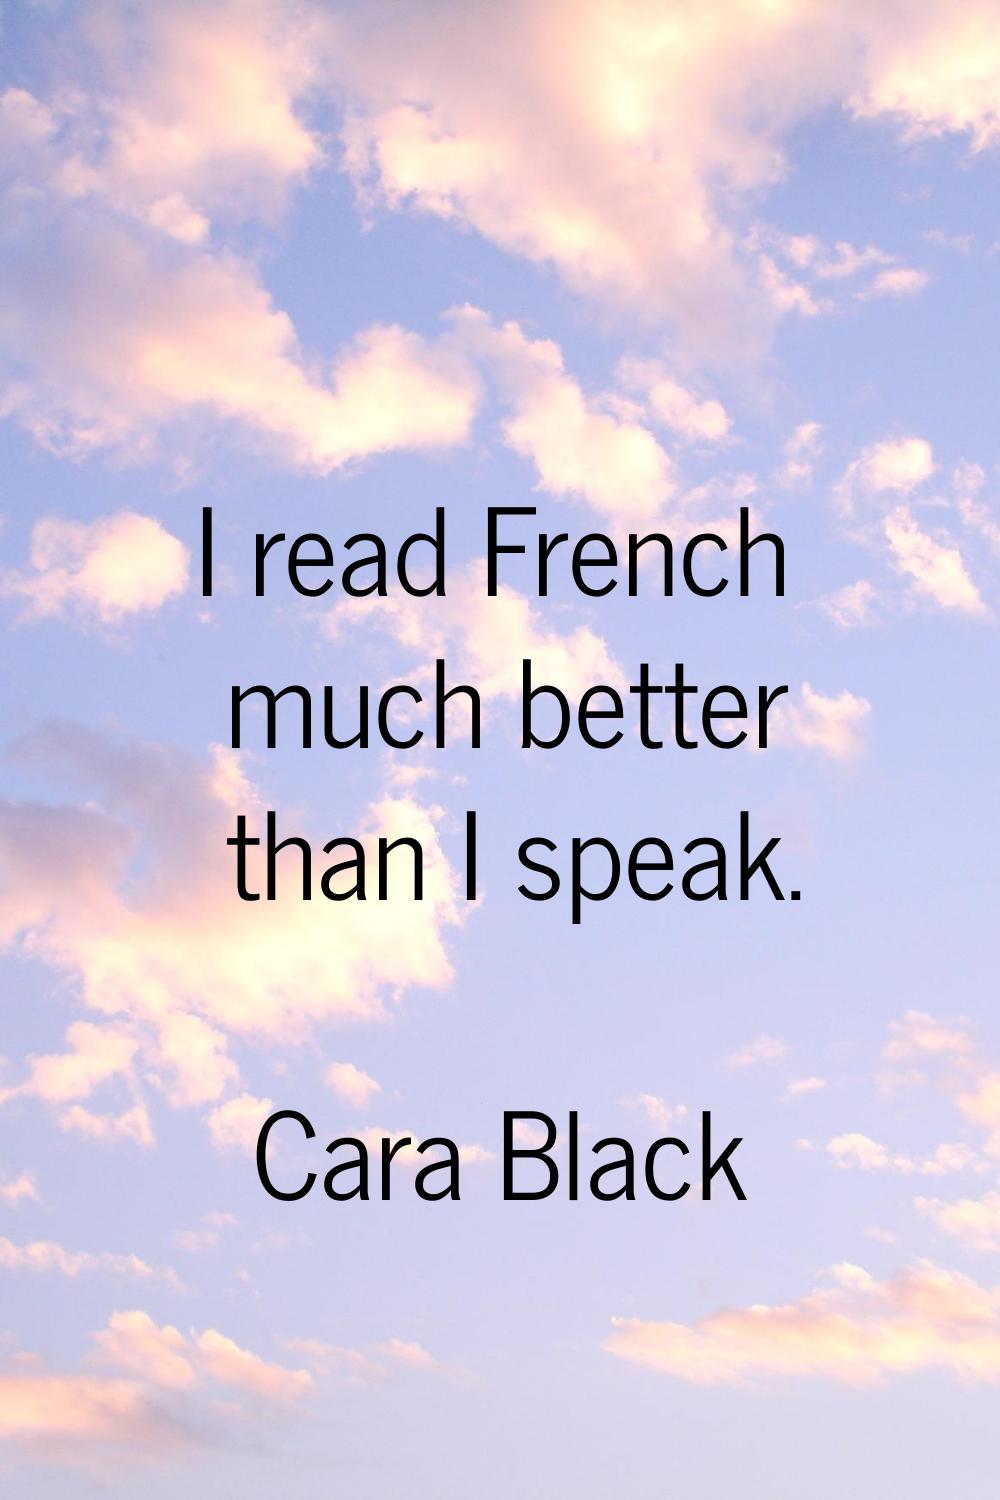 I read French much better than I speak.